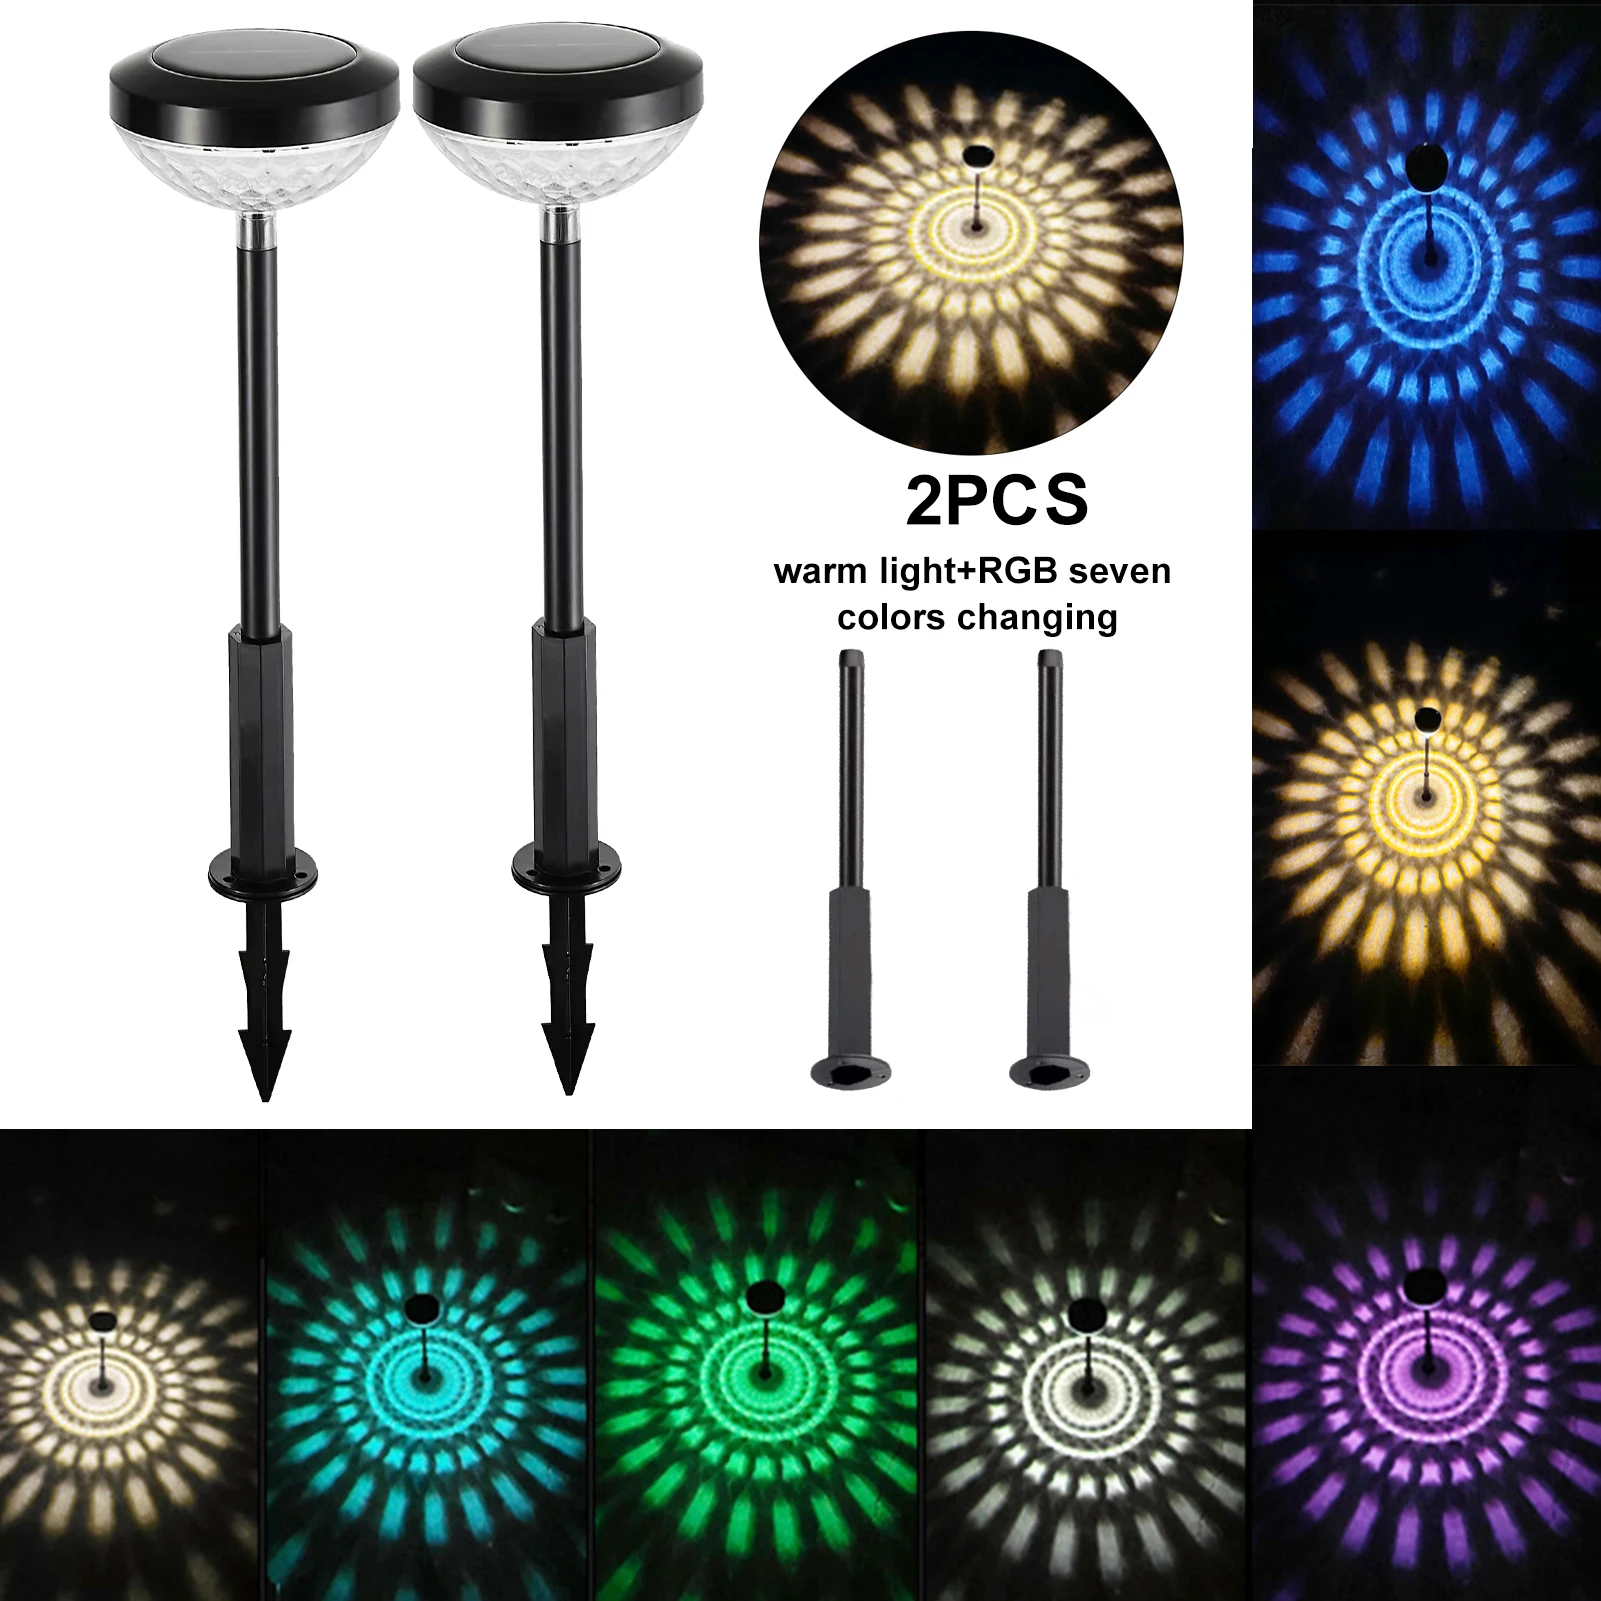 

2pcs/pack 2 Adjustable Modes Lawn Ground Stake Yard Projection Shine Garden Light Landscape Solar Powered Pathway Auto On Off